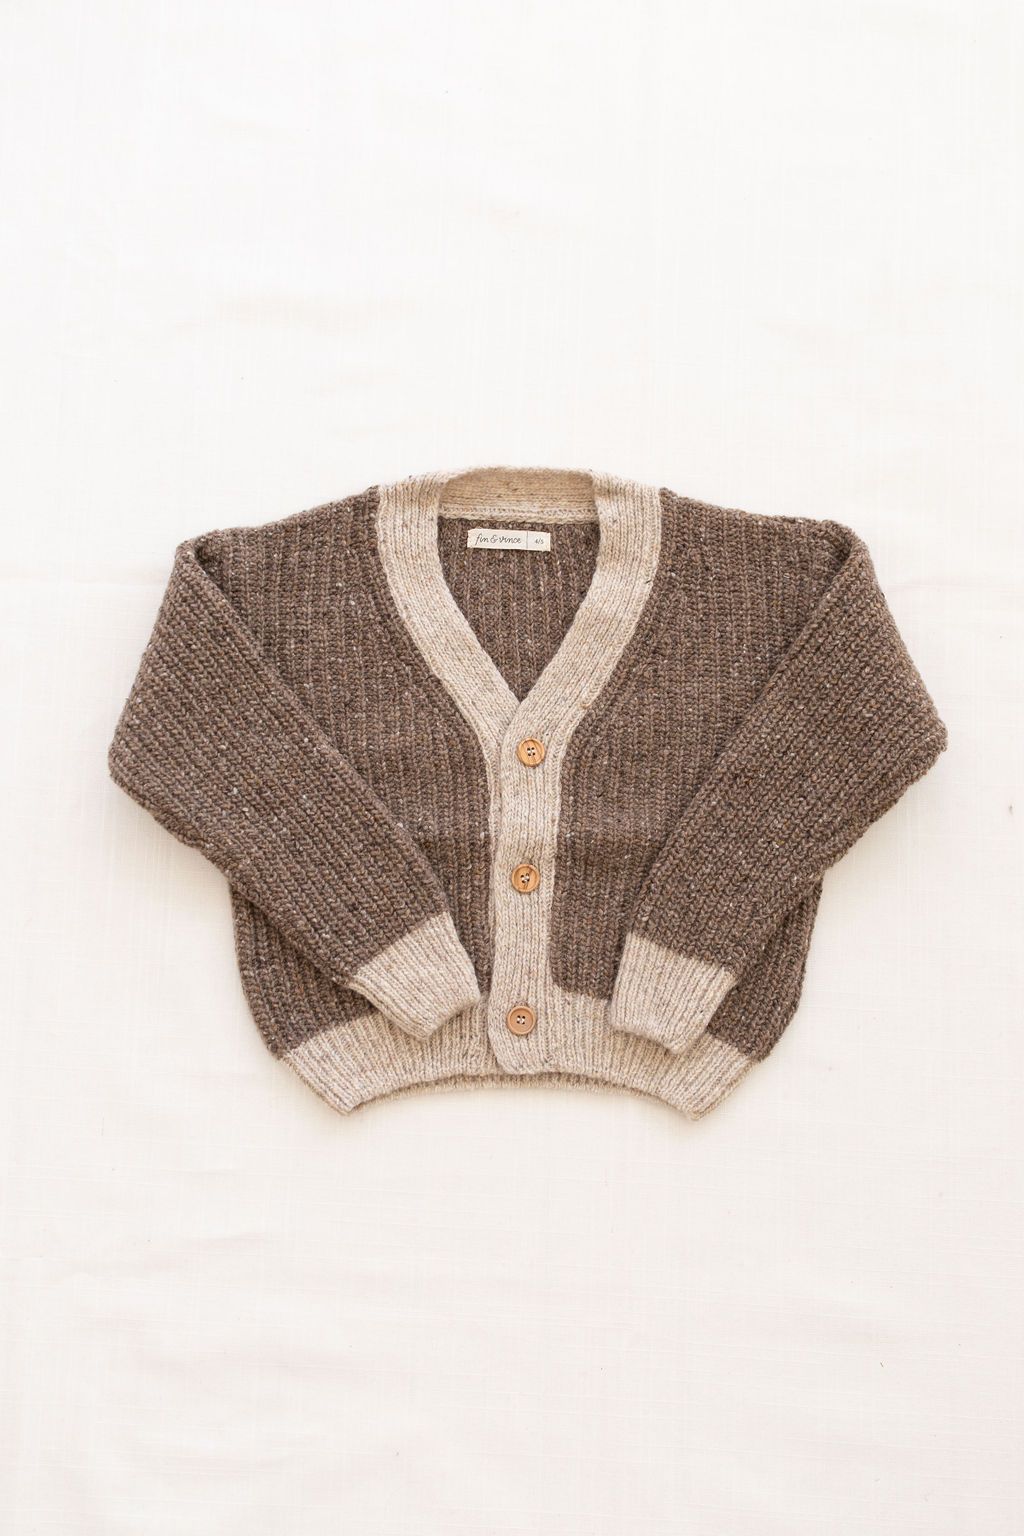 Fin and Vince Chunky Cardigan in Faded Chestnut | 40% OFF SALE | Children of the Wild